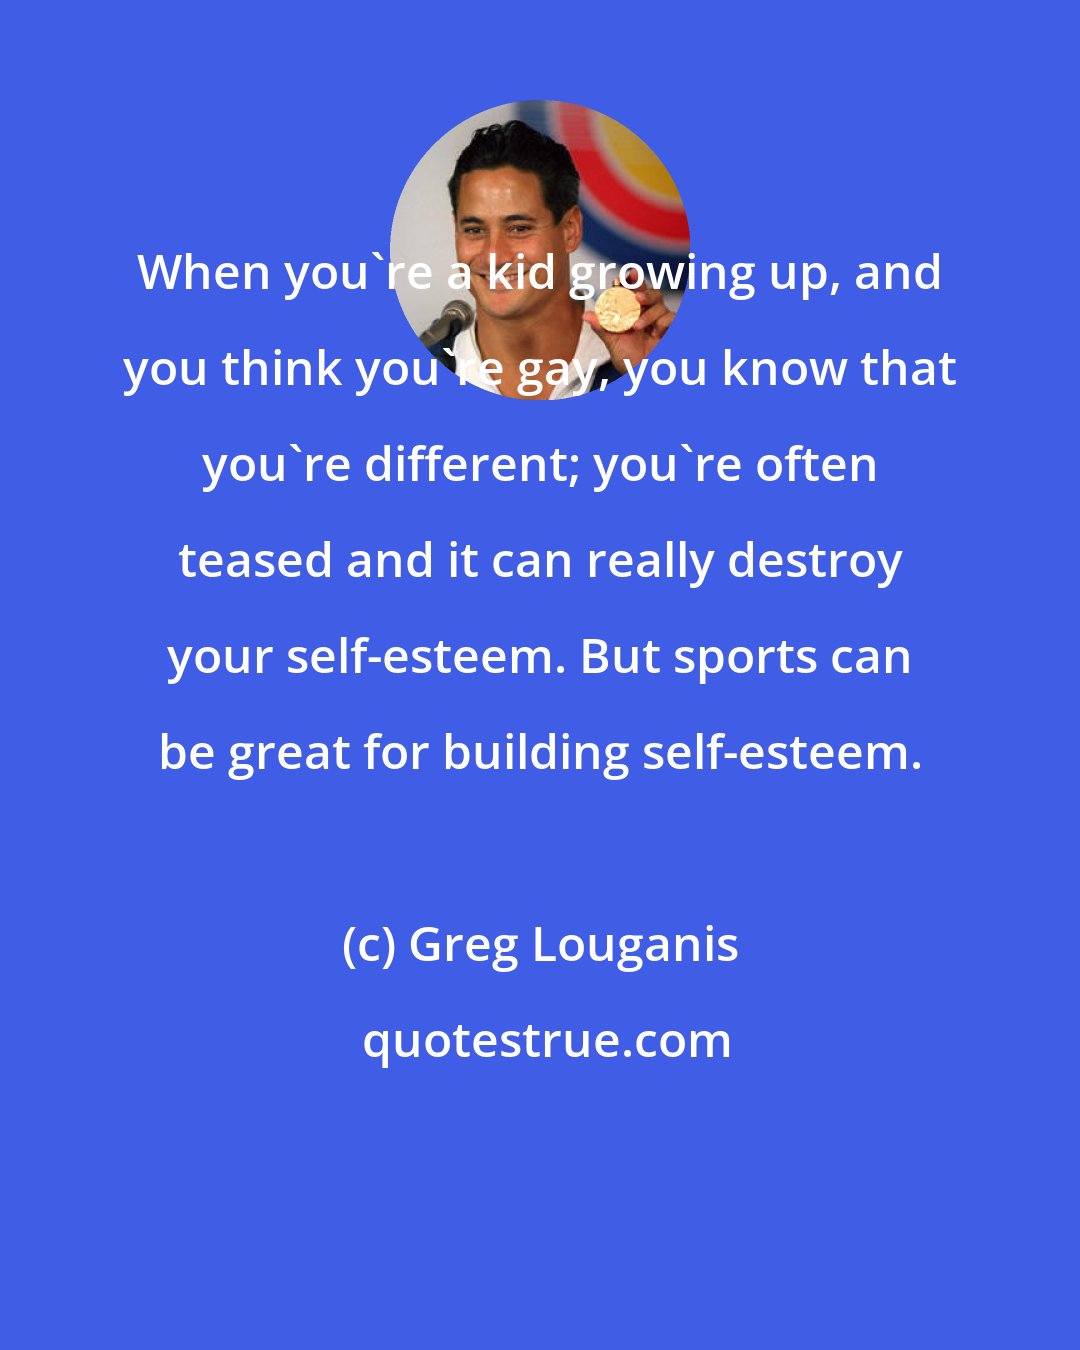 Greg Louganis: When you're a kid growing up, and you think you're gay, you know that you're different; you're often teased and it can really destroy your self-esteem. But sports can be great for building self-esteem.